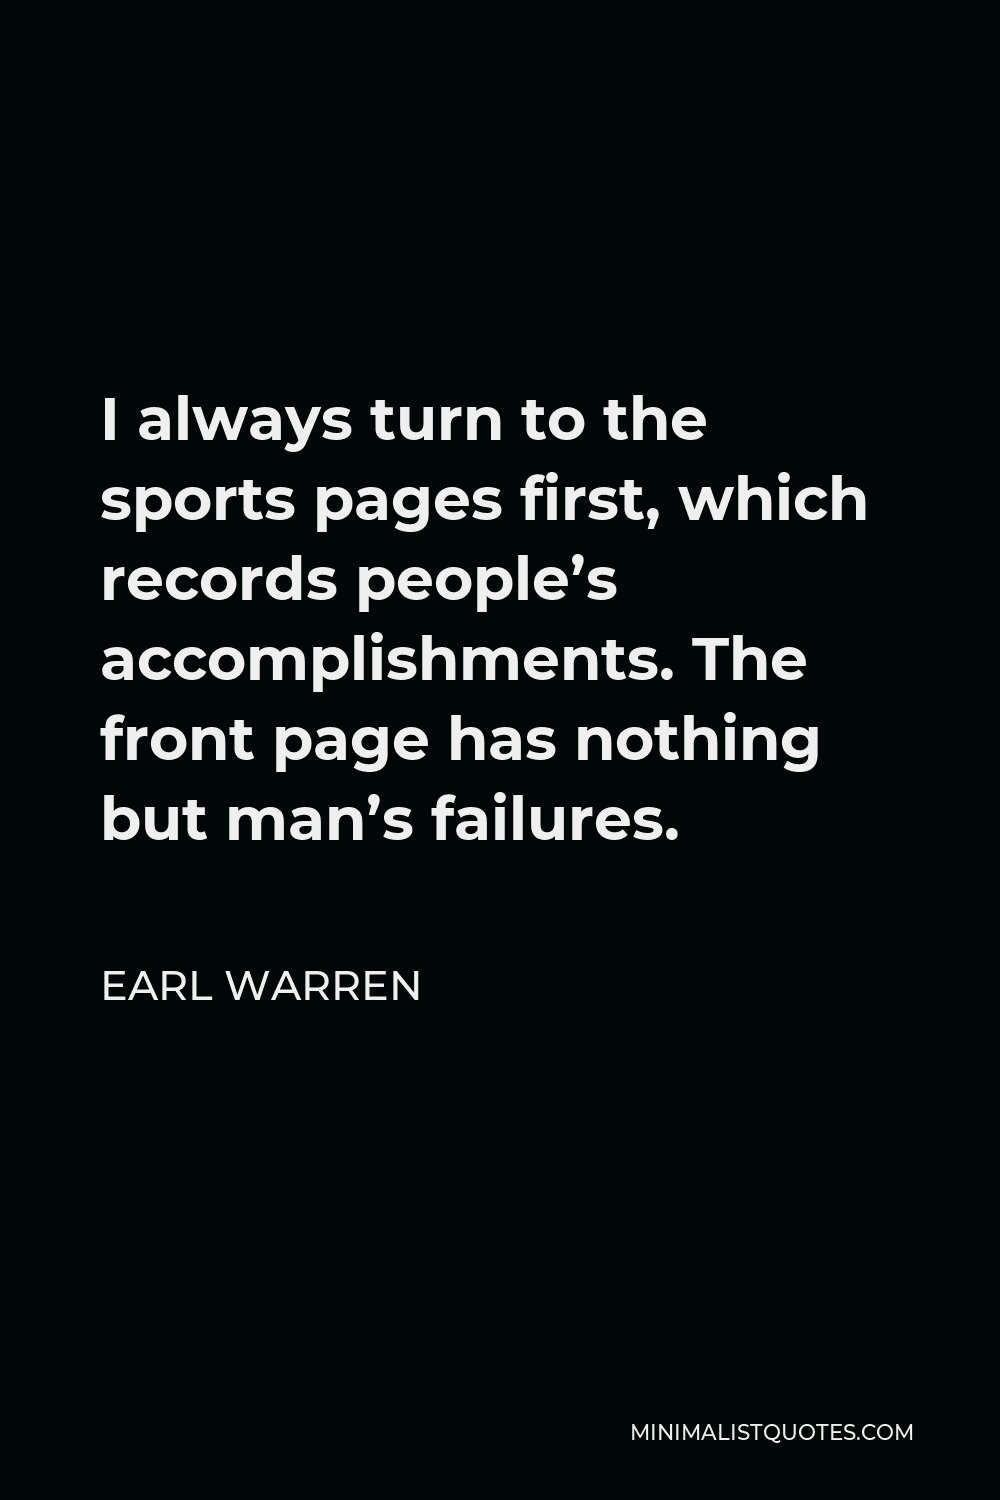 Earl Warren Quote - I always turn to the sports pages first, which records people’s accomplishments. The front page has nothing but man’s failures.